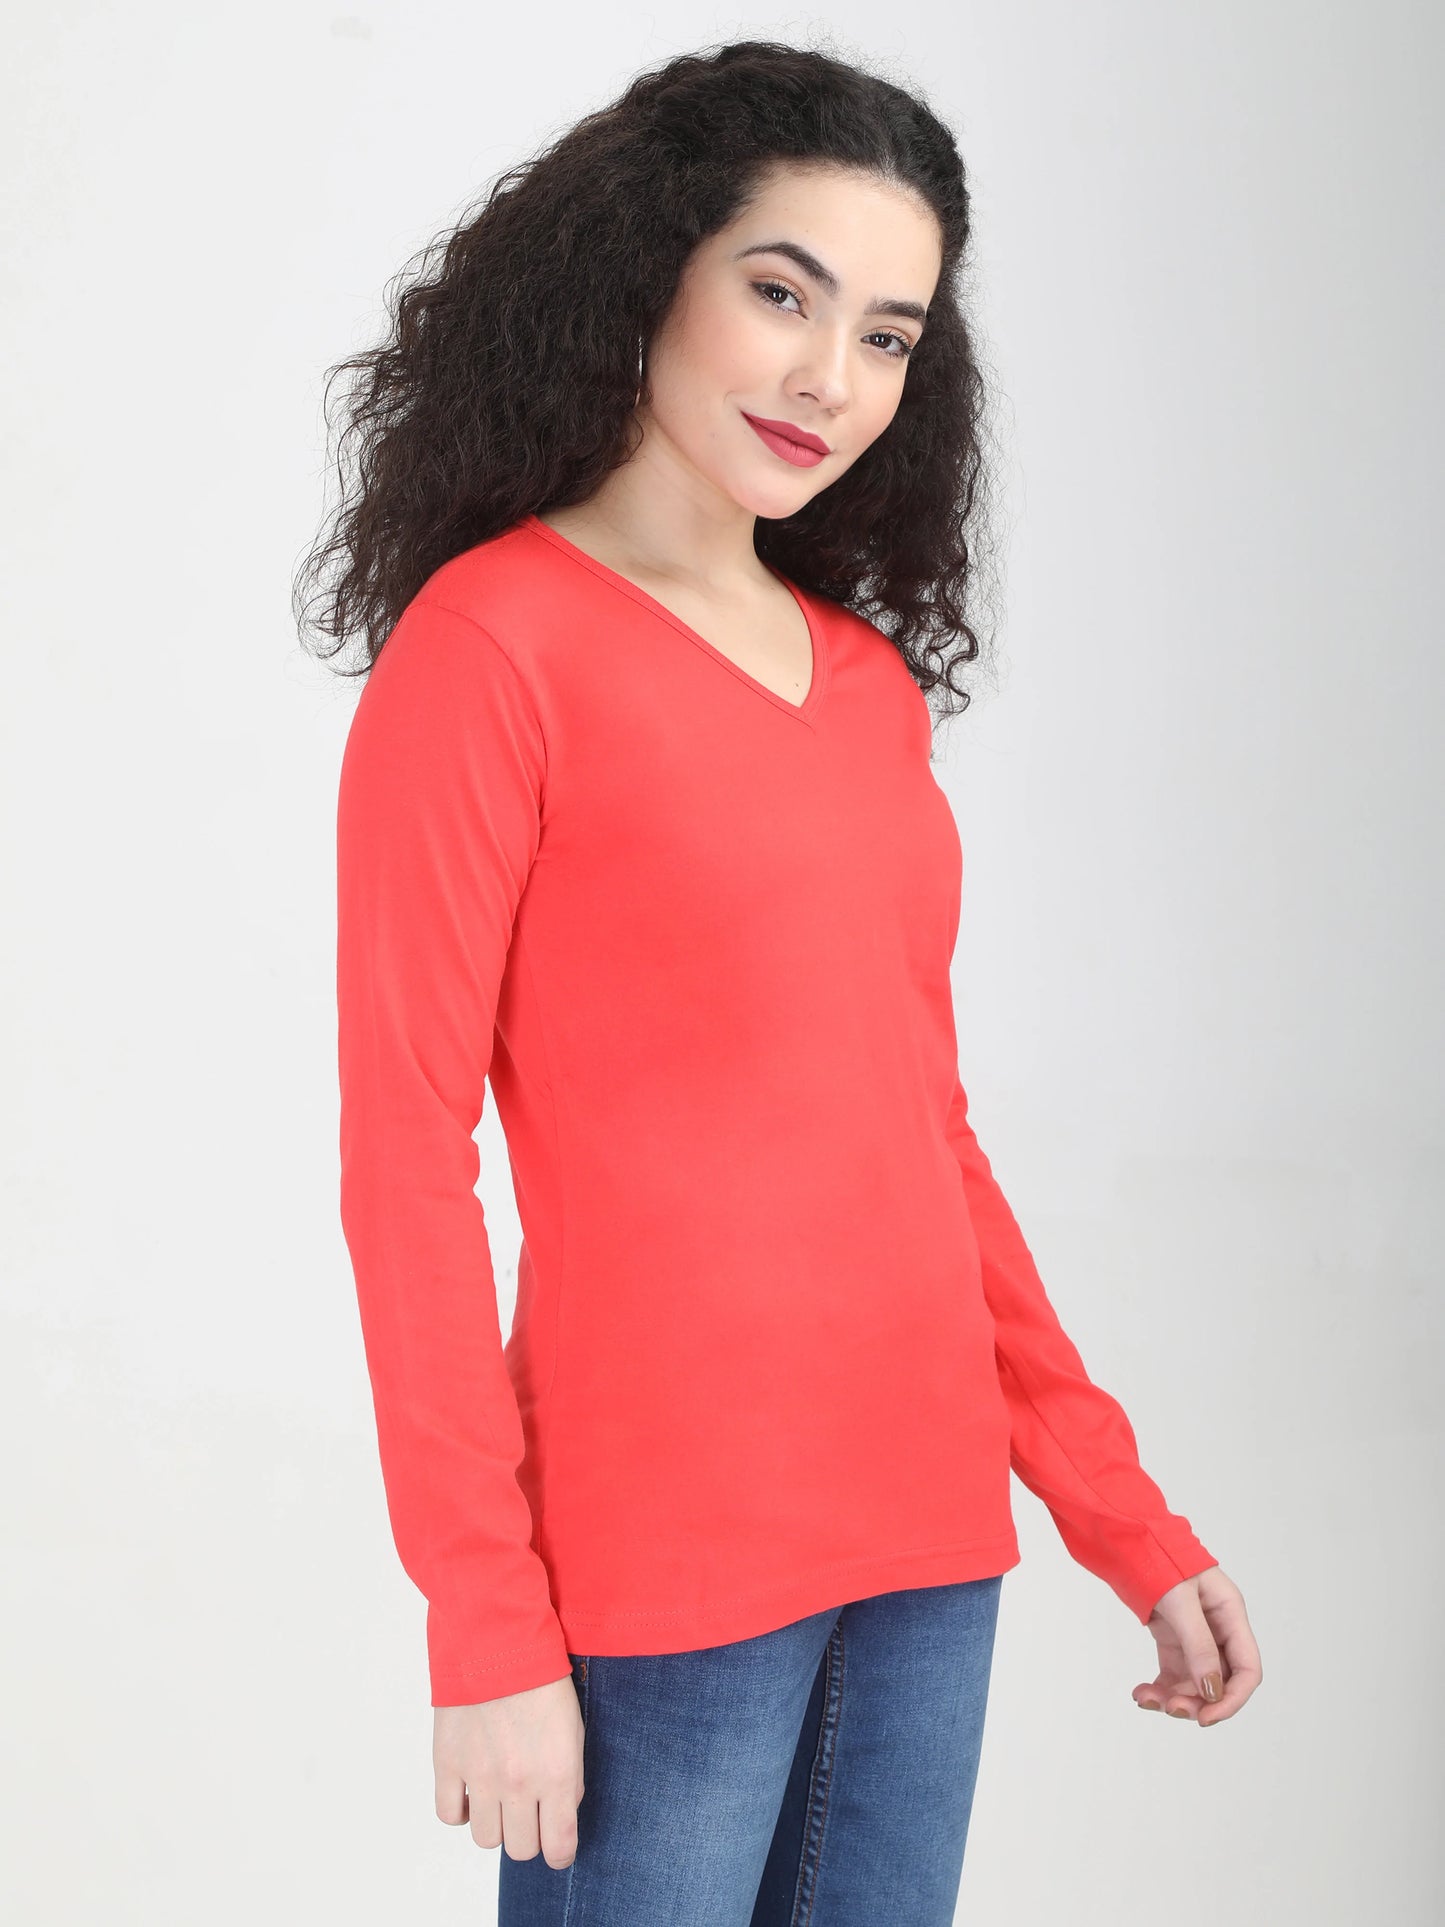 Women's Cotton Plain V Neck Full Sleeve Coral Red Color T-Shirt